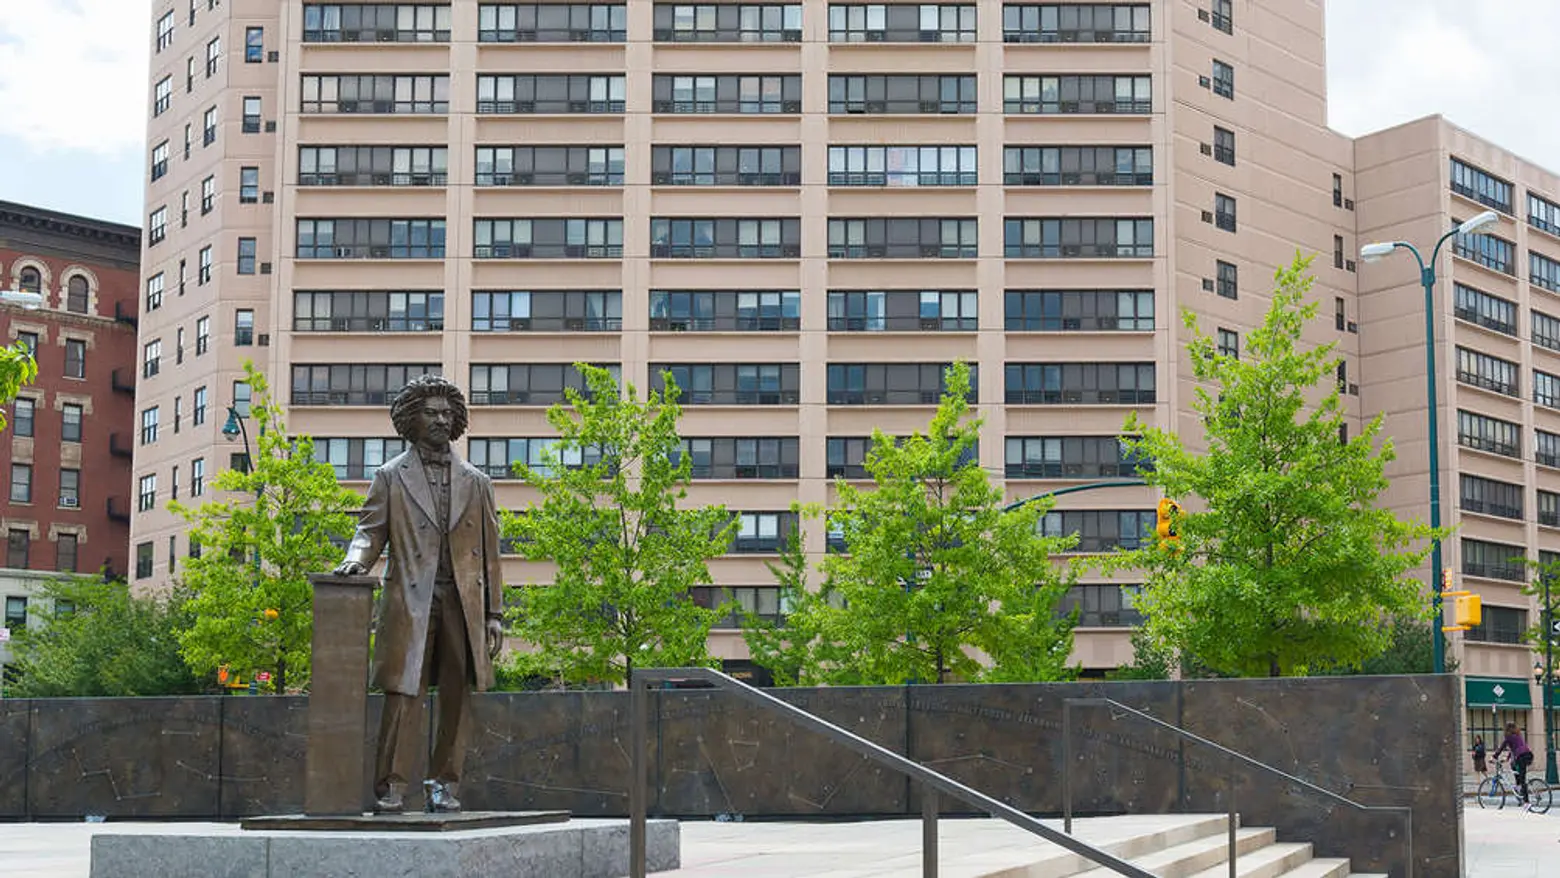 ‘Talking Statues’ project brings NYC history to life with a new smartphone app